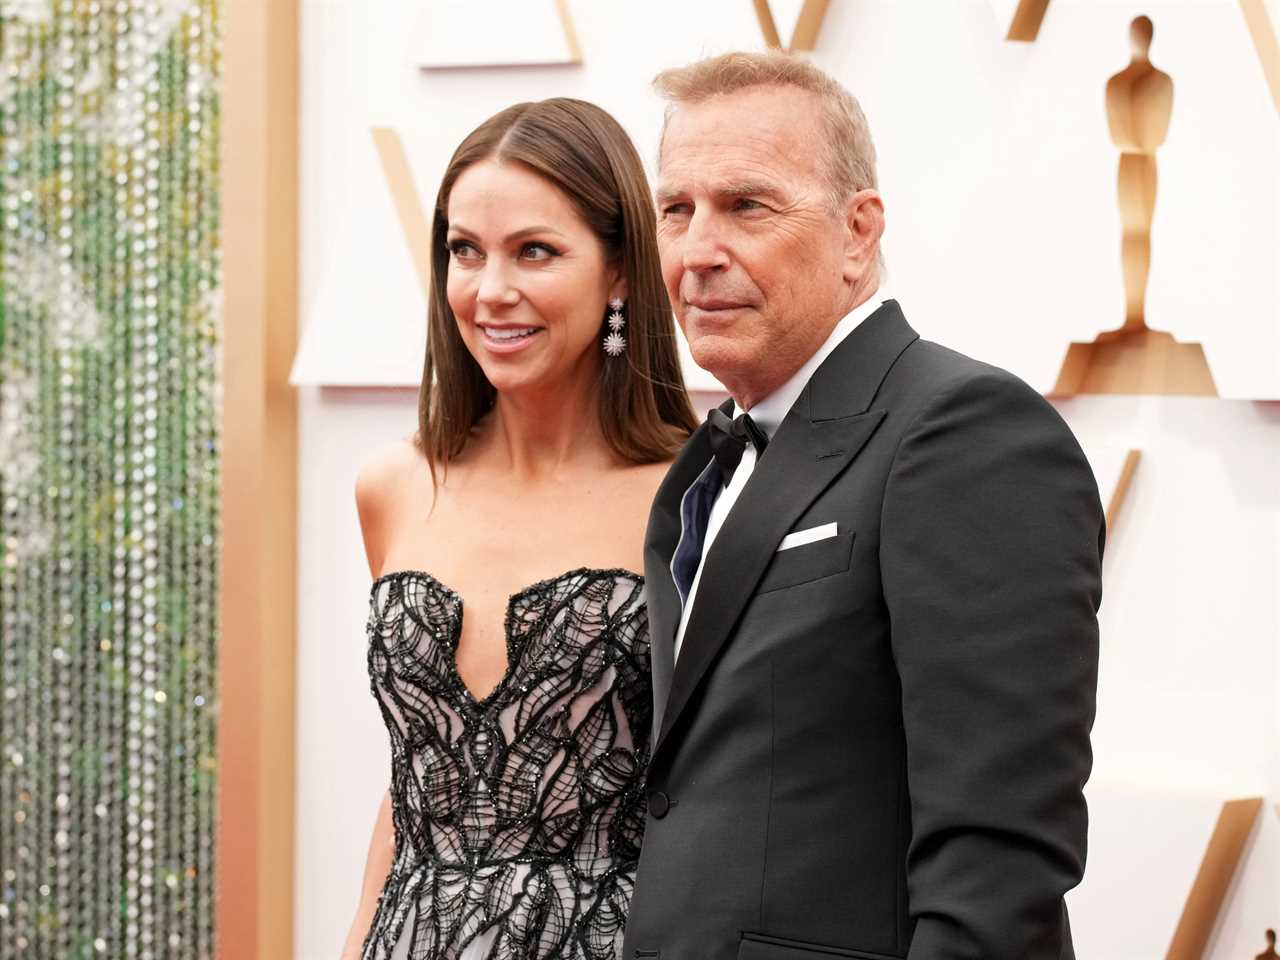 Christine Baumgartner and Kevin Costner attend the 94th Annual Academy Awards at Hollywood and Highland on March 27, 2022 in Hollywood, California.